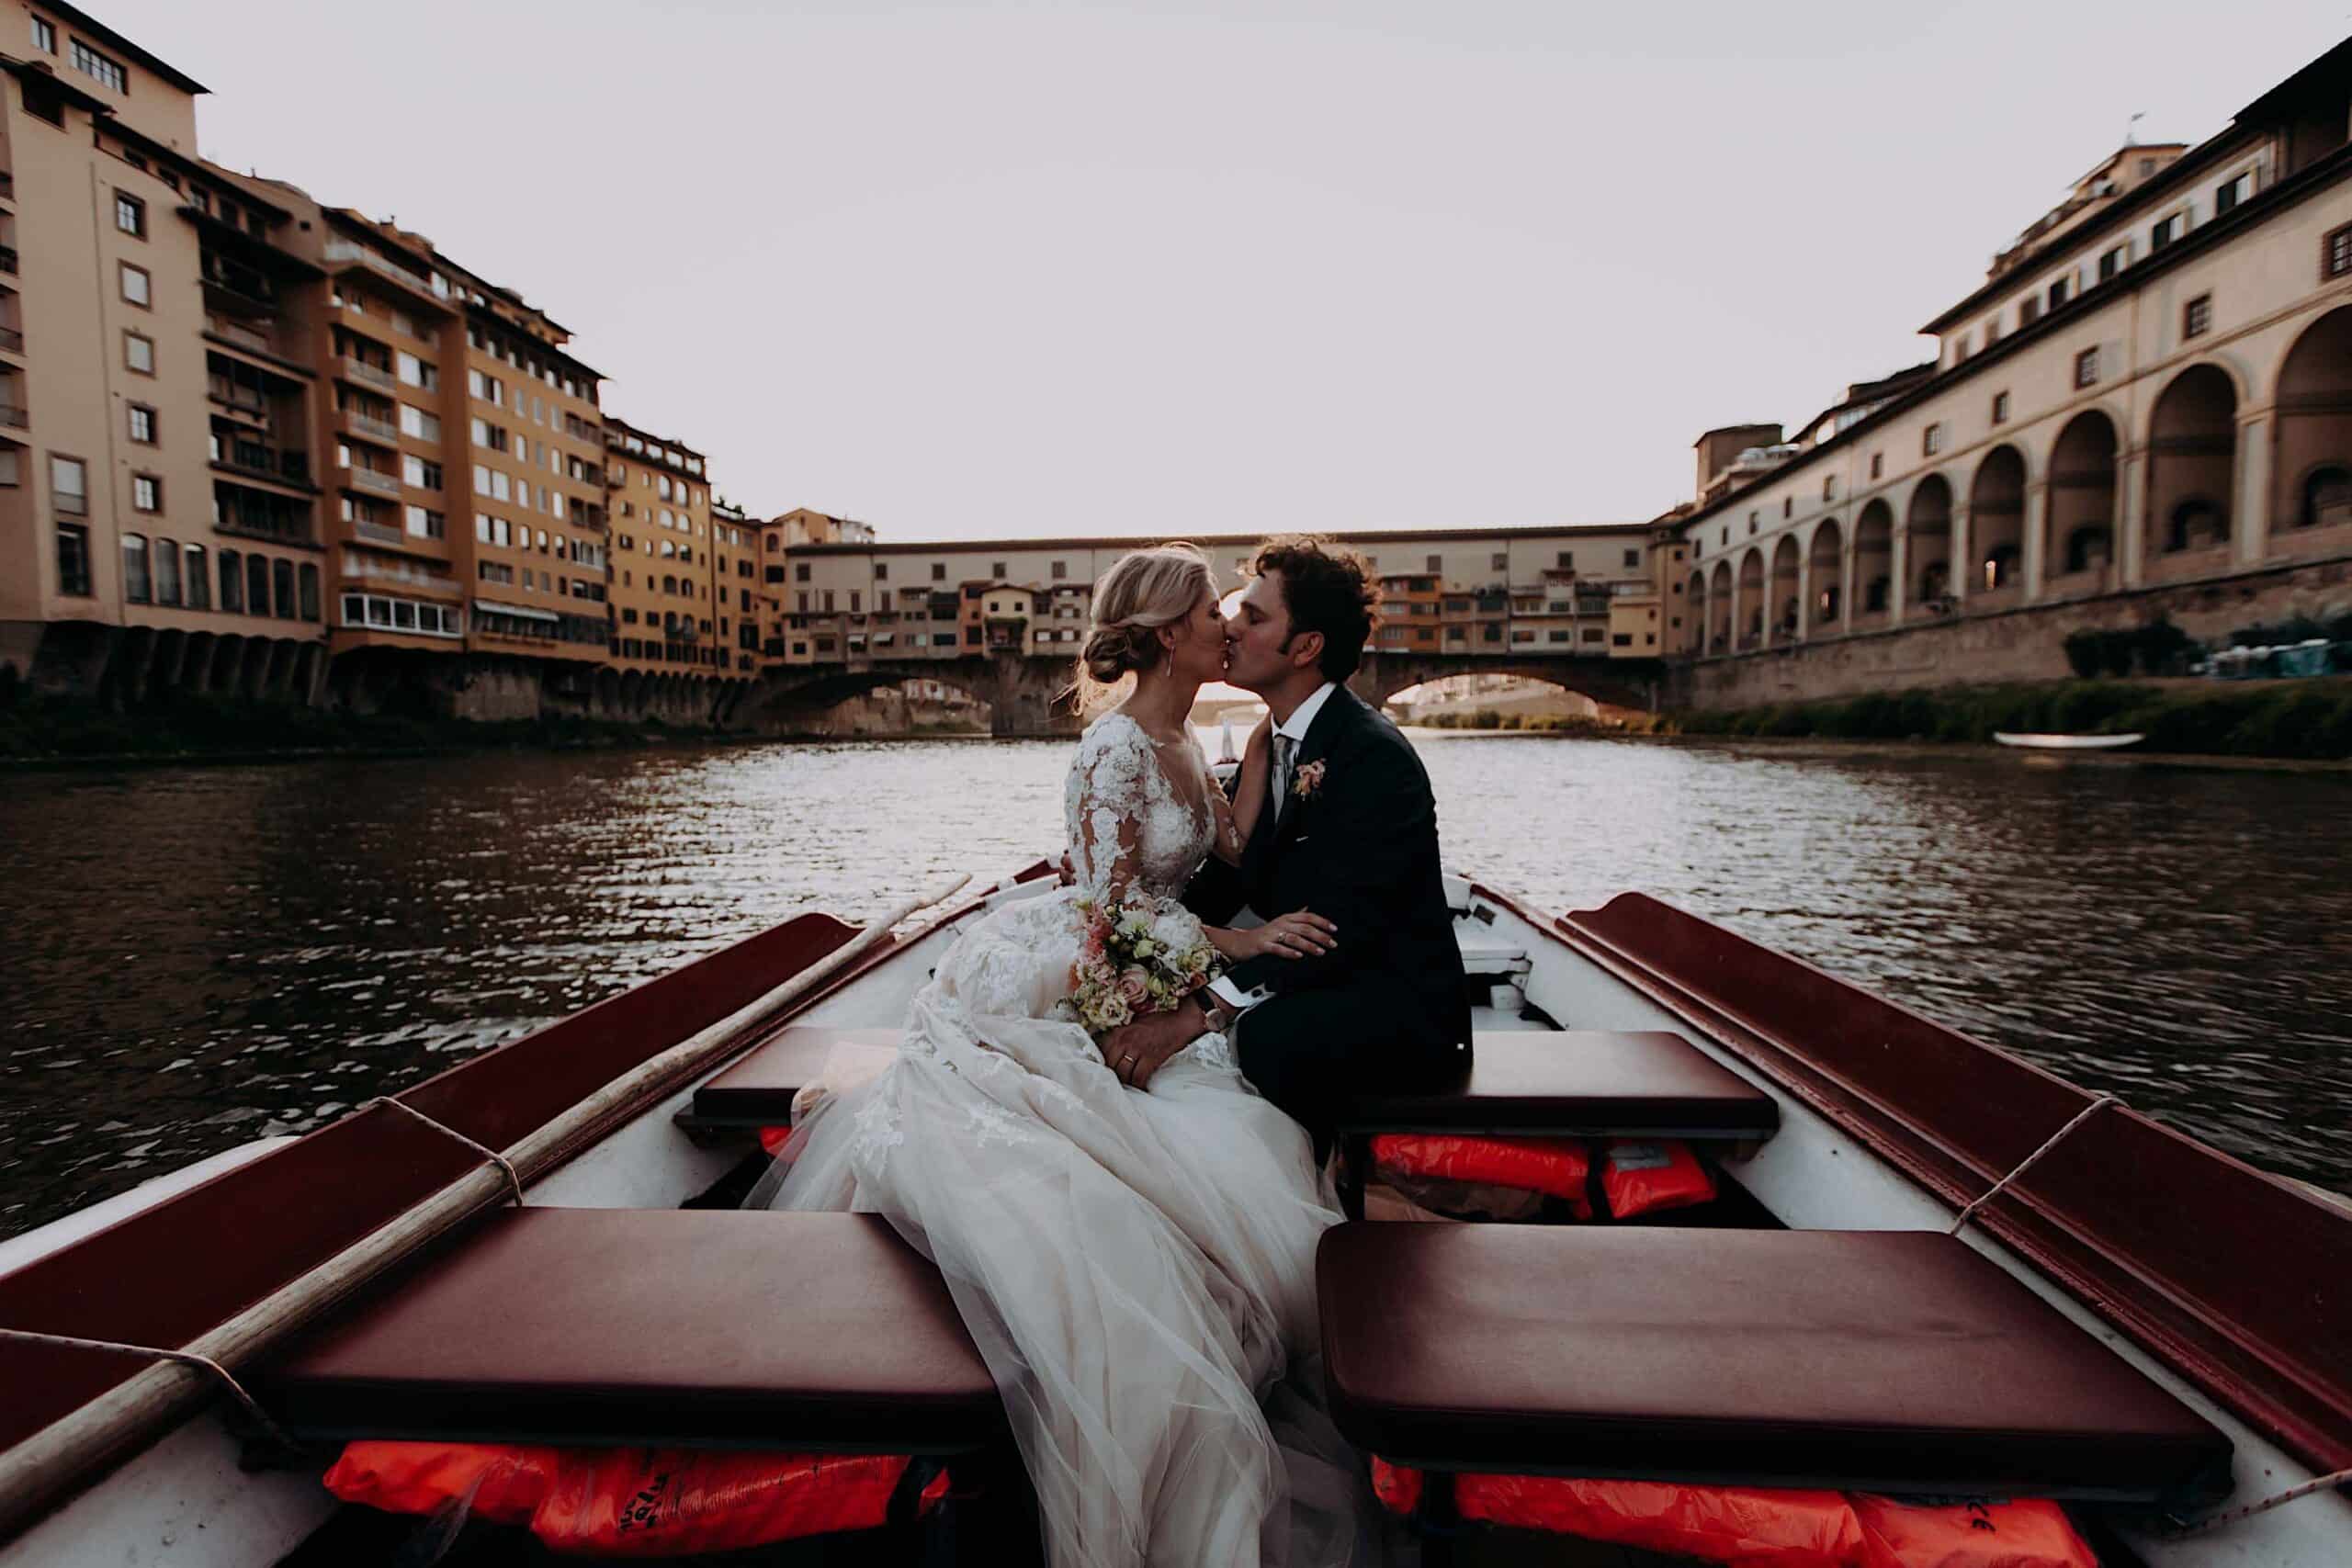 by boat on the Arno River in Florence